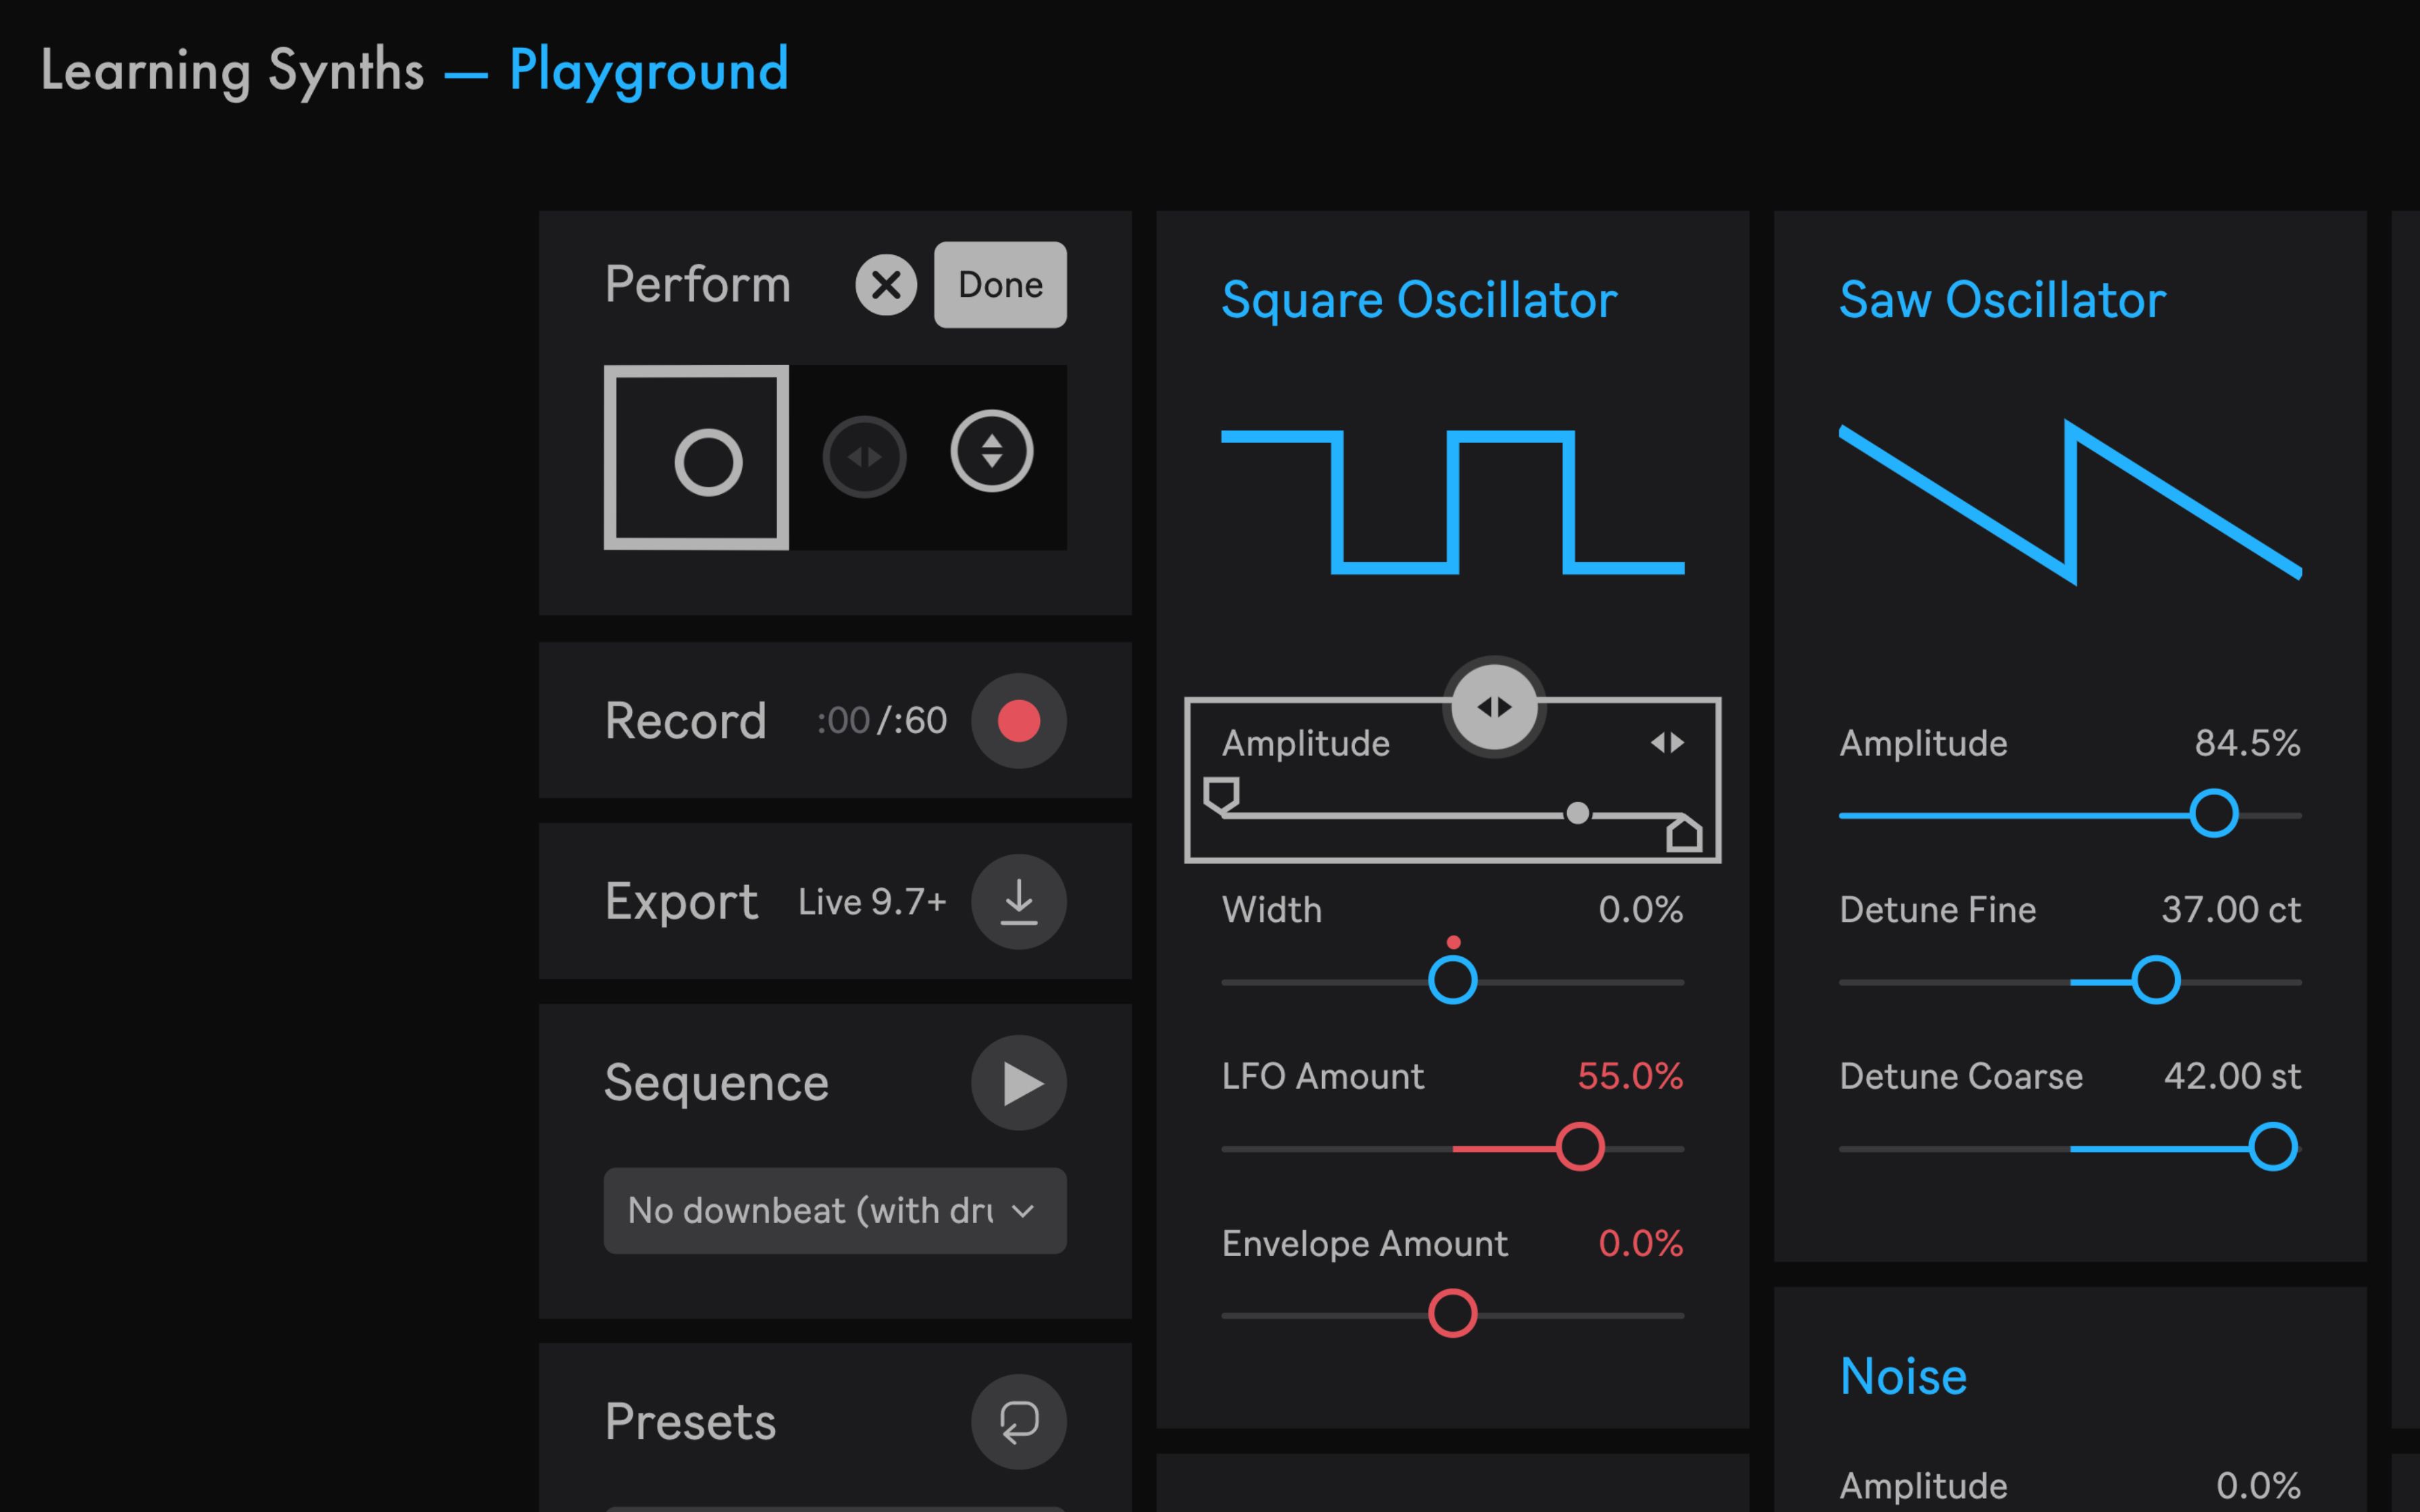 Learning Synths Playground Map function